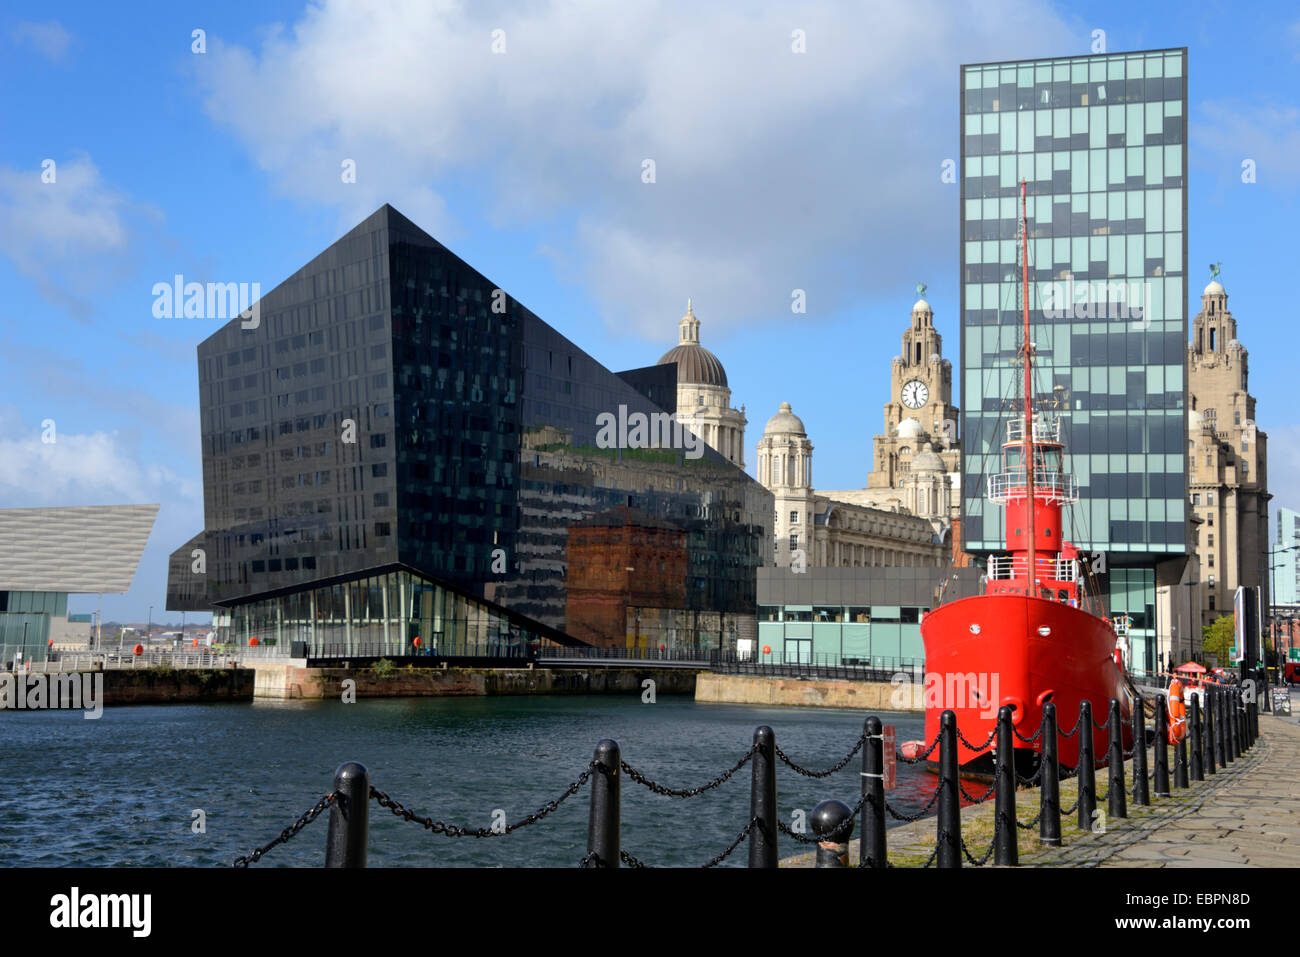 Mann Island and the Three Graces viewed from Canning Dock, Liverpool, Merseyside, England, United Kingdom, Europe Stock Photo